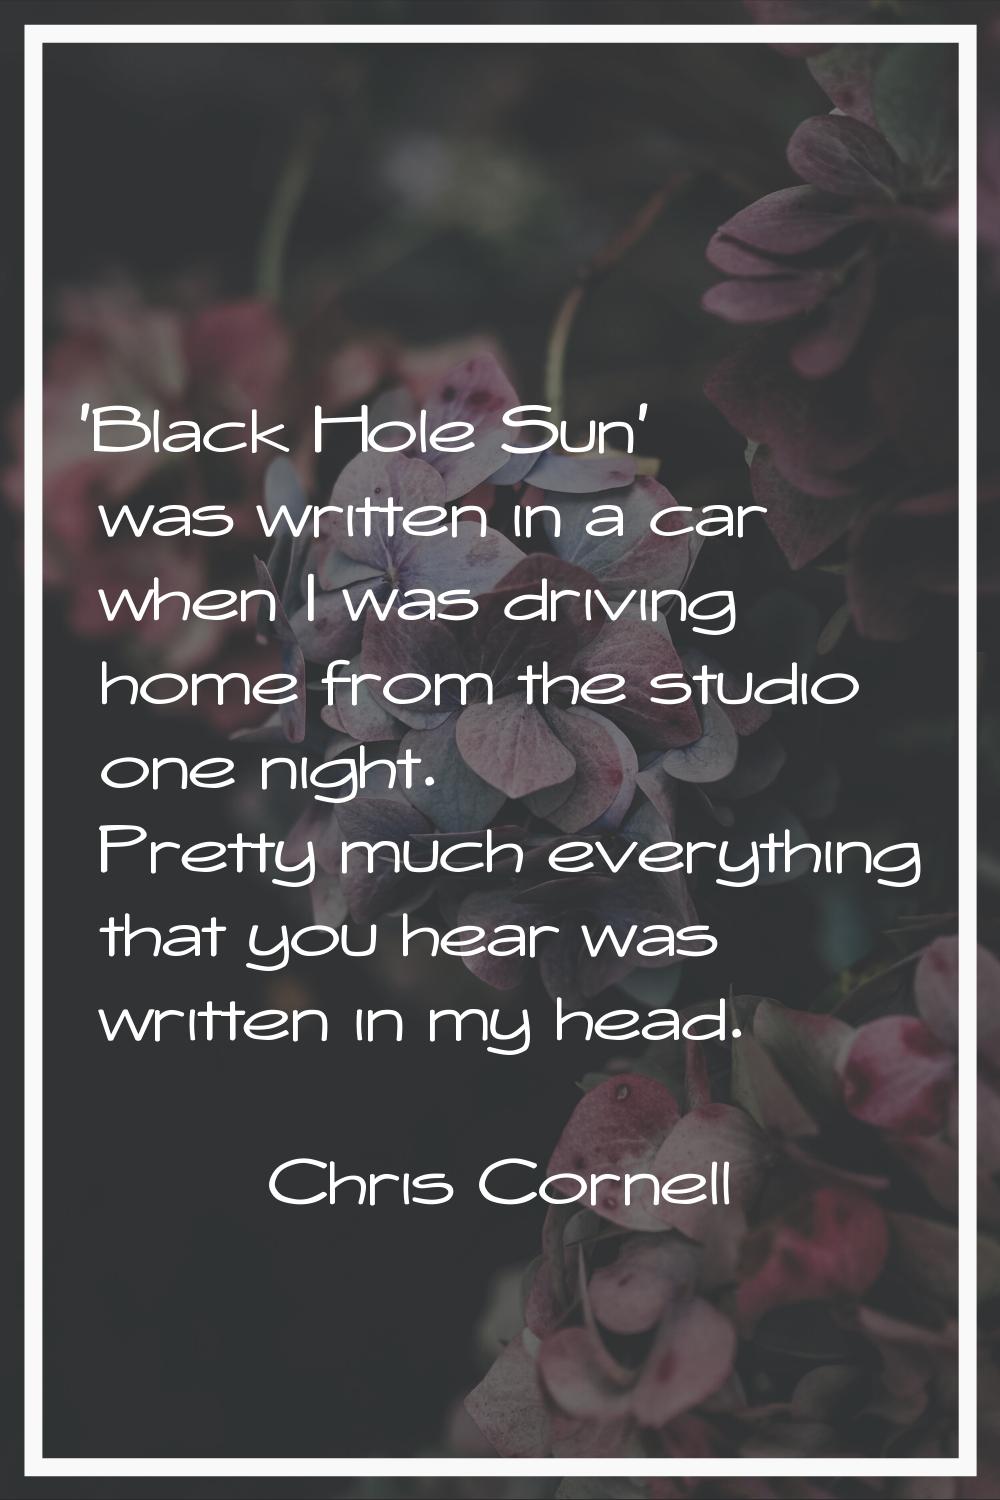 'Black Hole Sun' was written in a car when I was driving home from the studio one night. Pretty muc